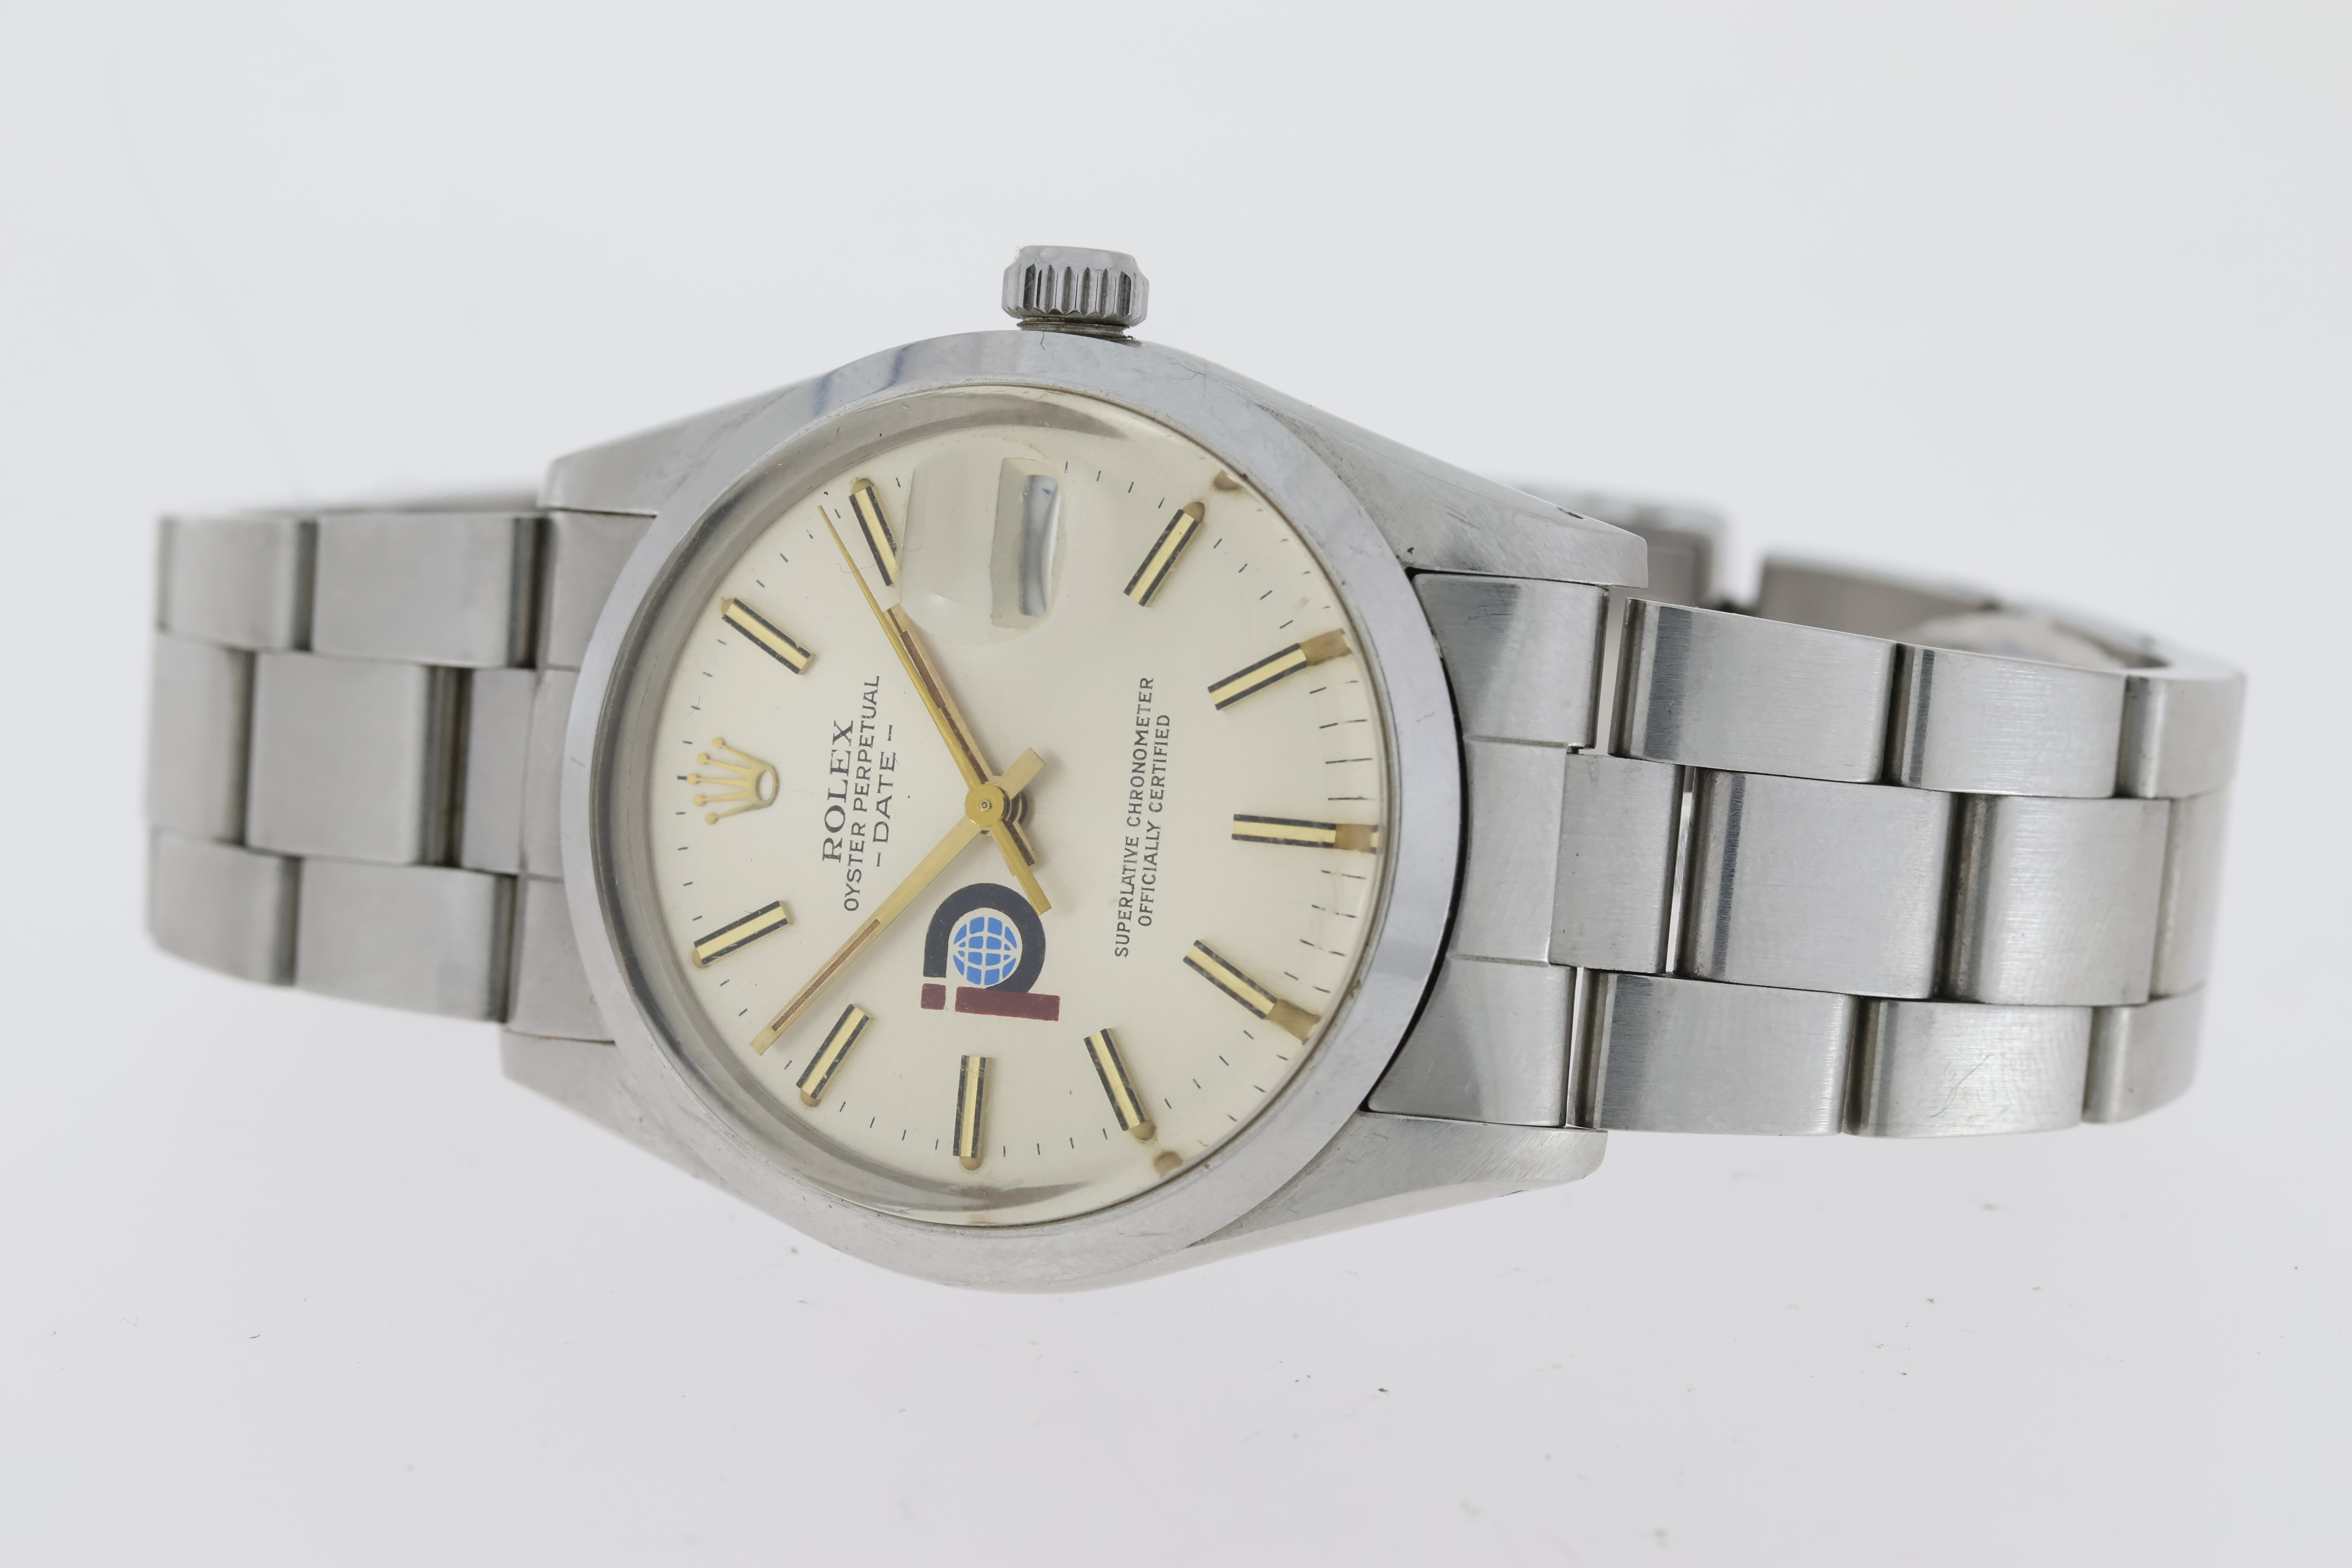 ROLEX OYSTER PERPETUAL DATE POOL INTAIRDRILL WATCH REFERENCE 15000 WITH BOX - Image 2 of 4